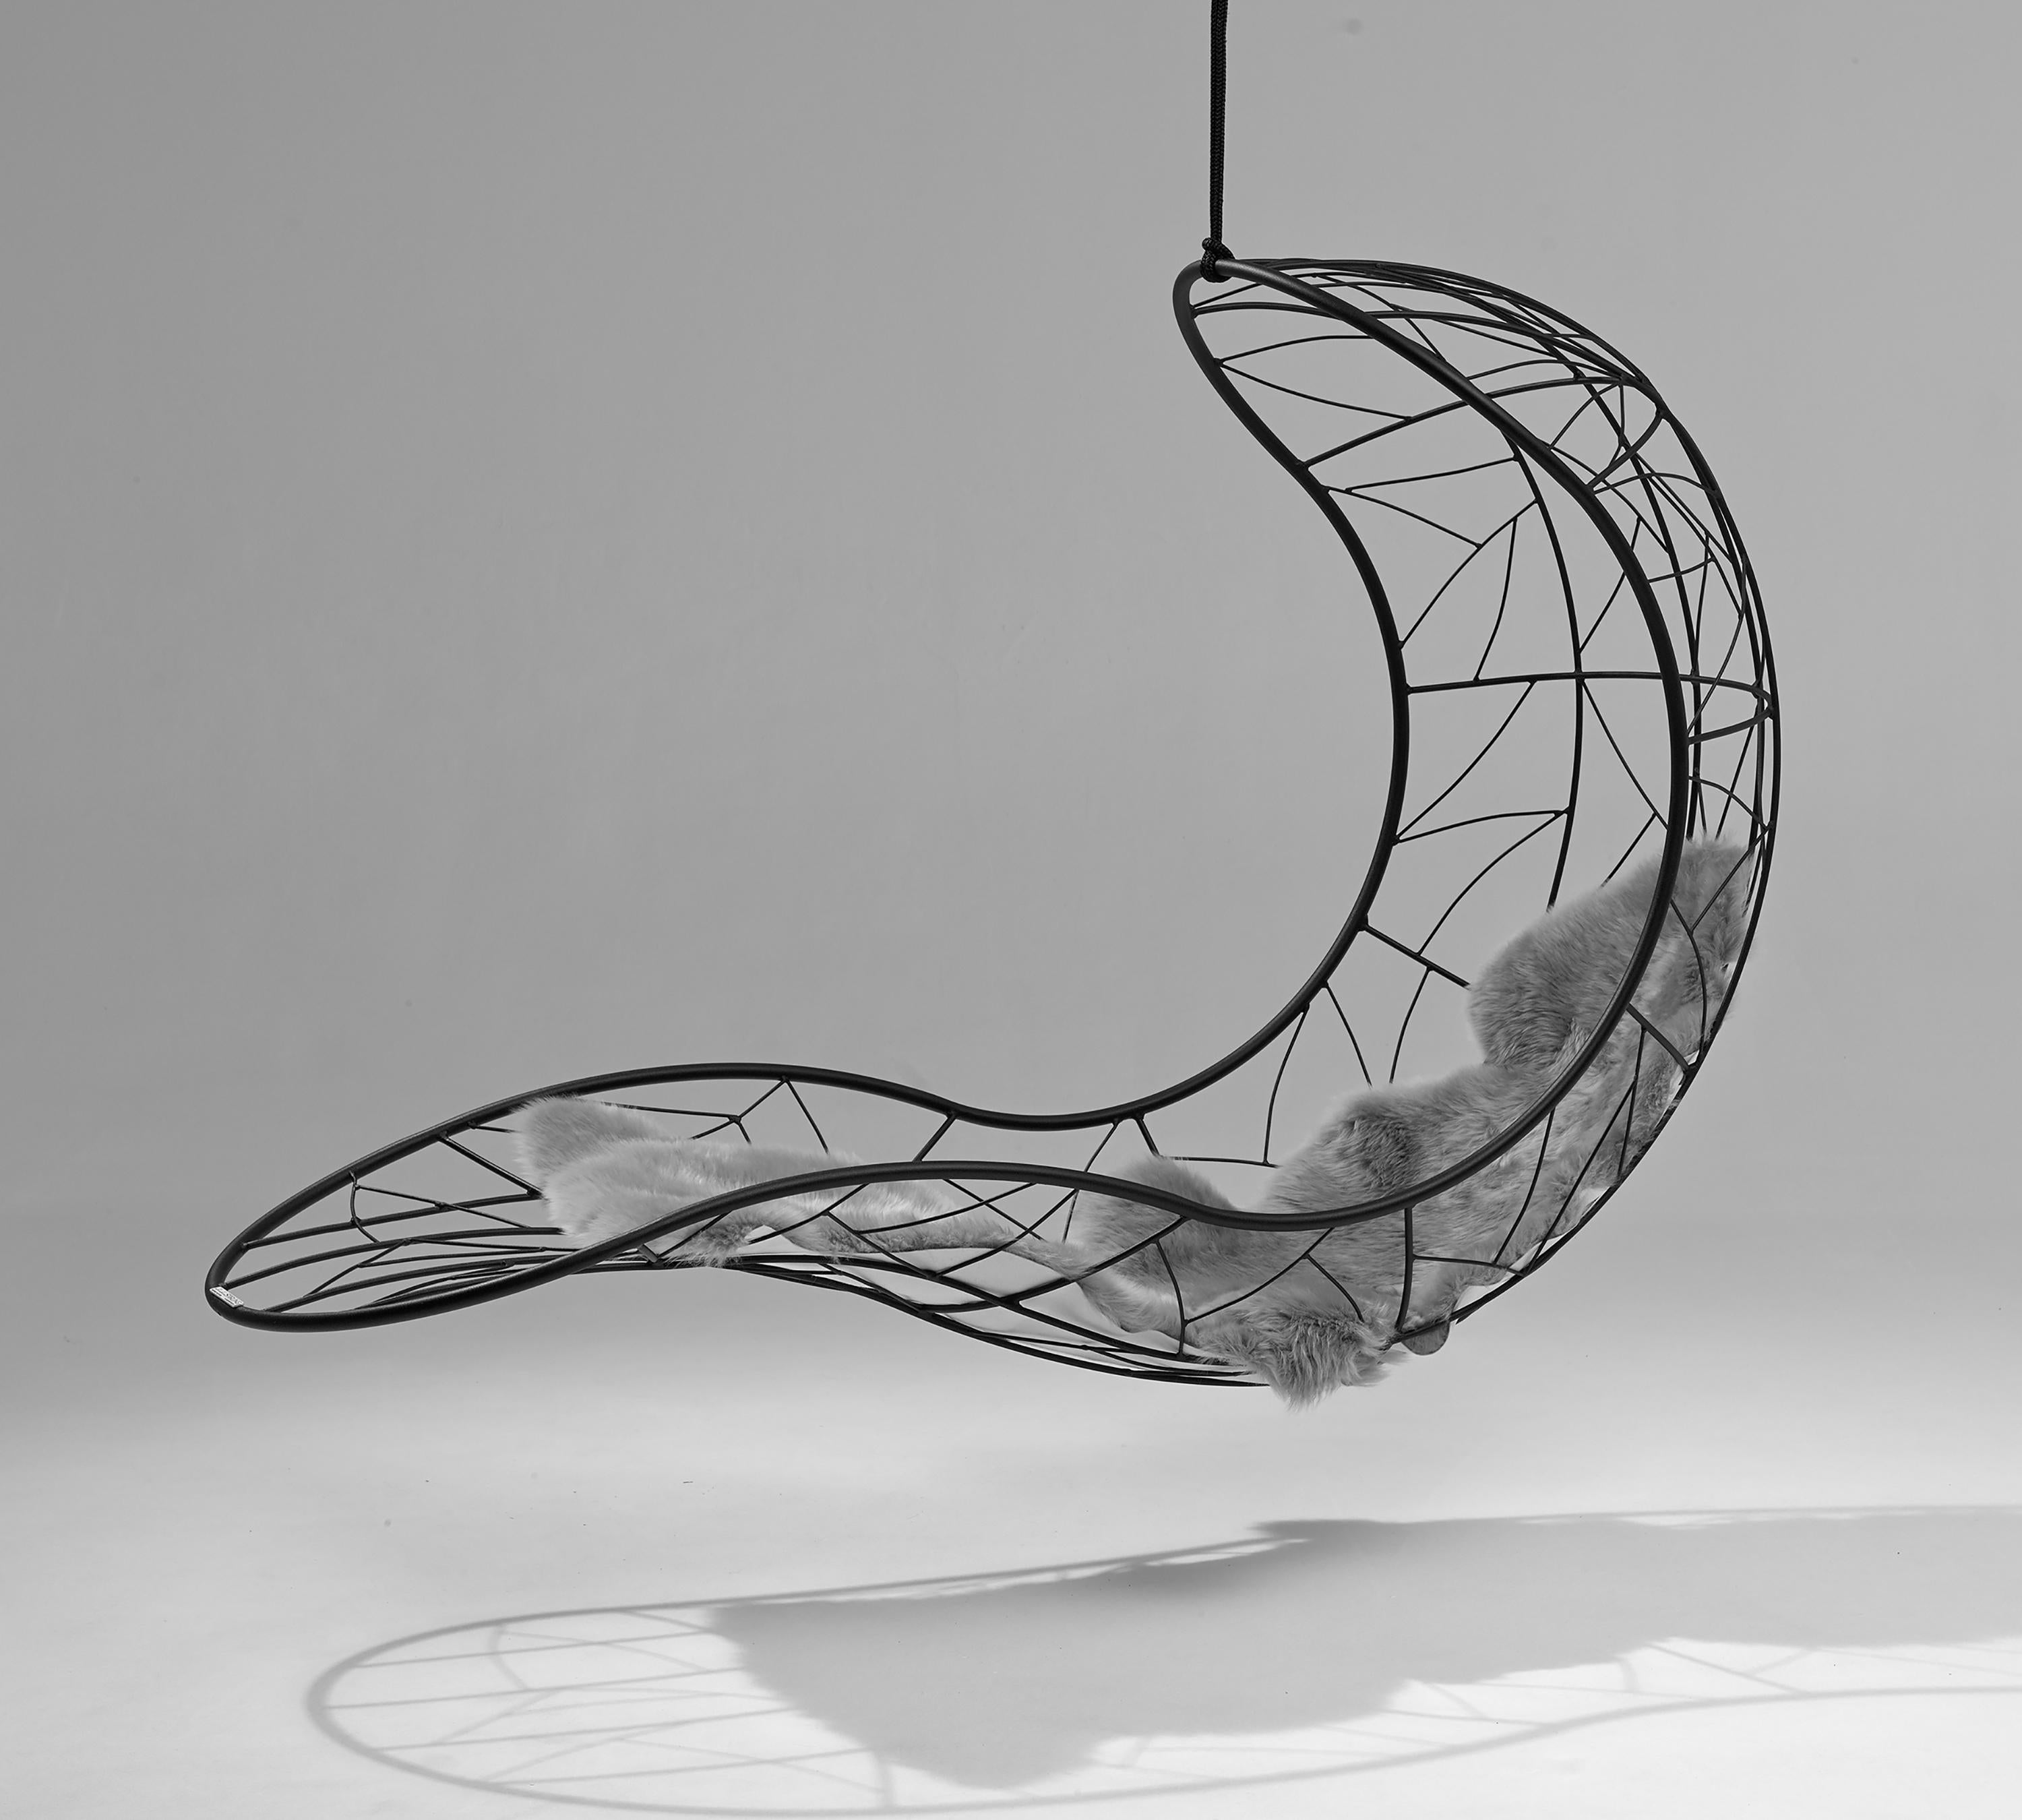 The Recliner hanging chair swing seat has elegantly curved lines & is sculptural and dynamic with a considered balance point.

Fluid & organic, it lends itself for use as a functional art piece. Its gentle movement gives a relaxing, floating